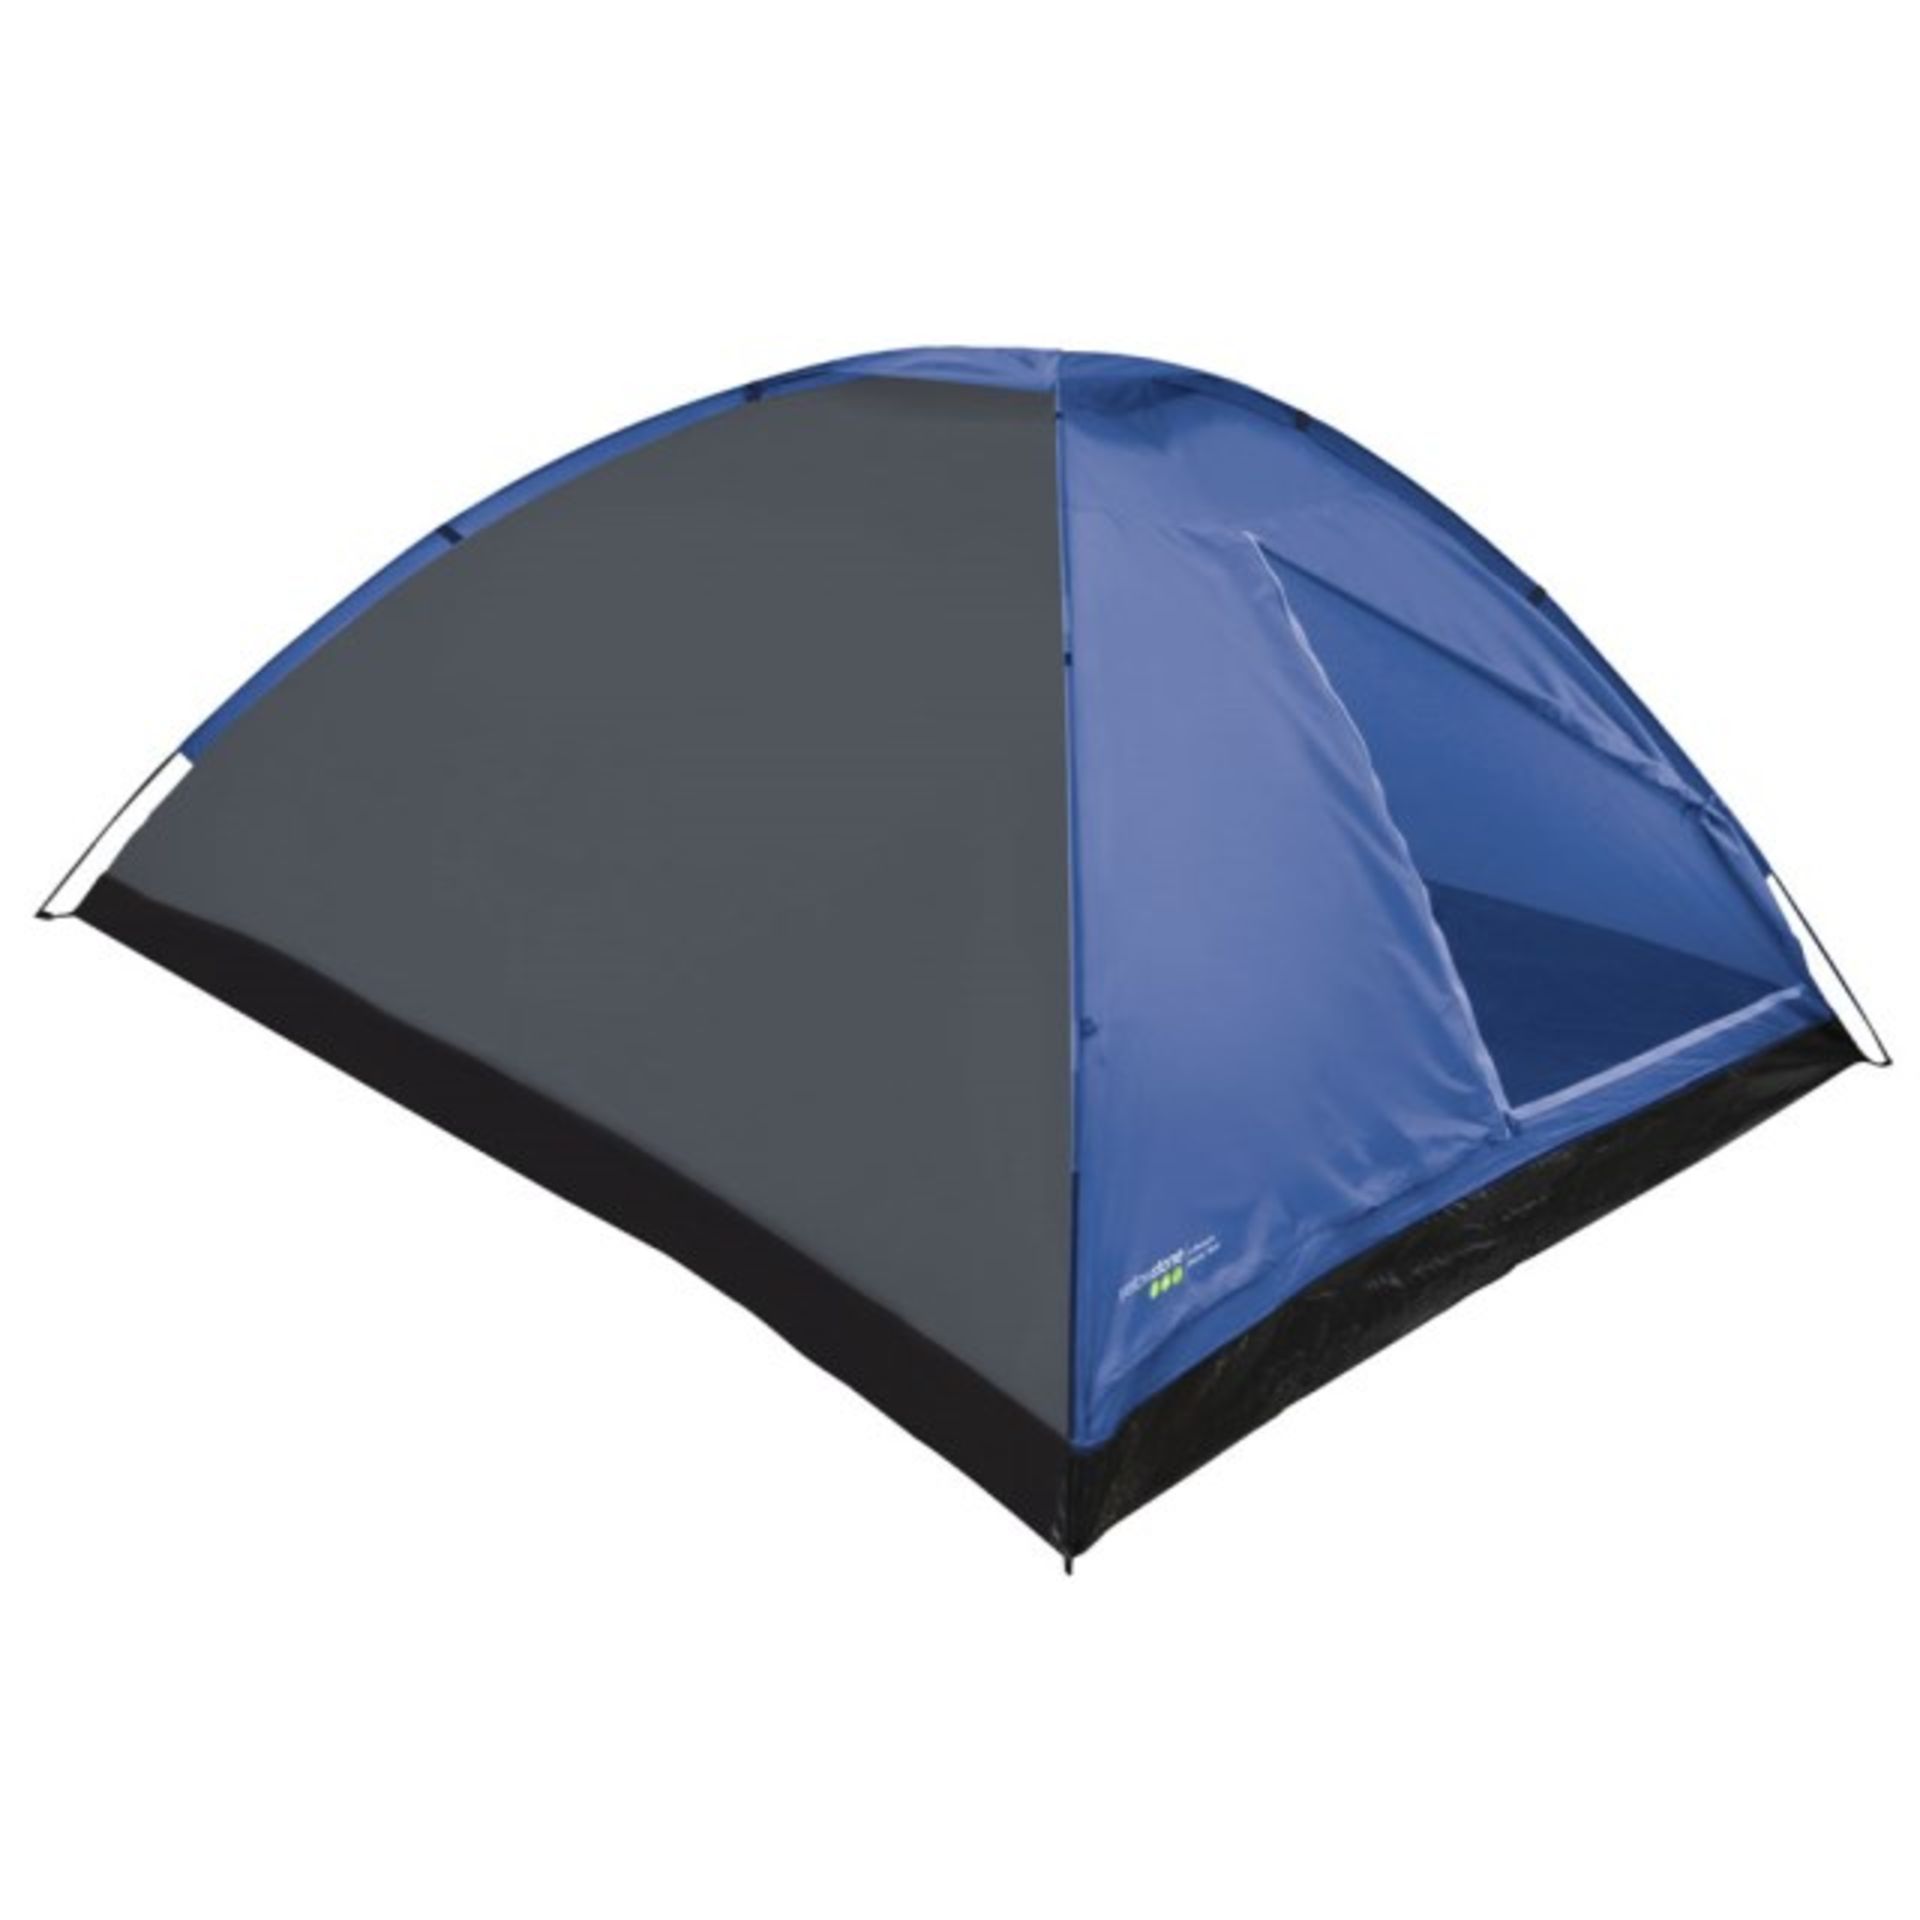 V *TRADE QTY* Grade A 4 Person Dome Tent With Taped seams And Fibreglass Poles RRP25.00 X 80 YOUR